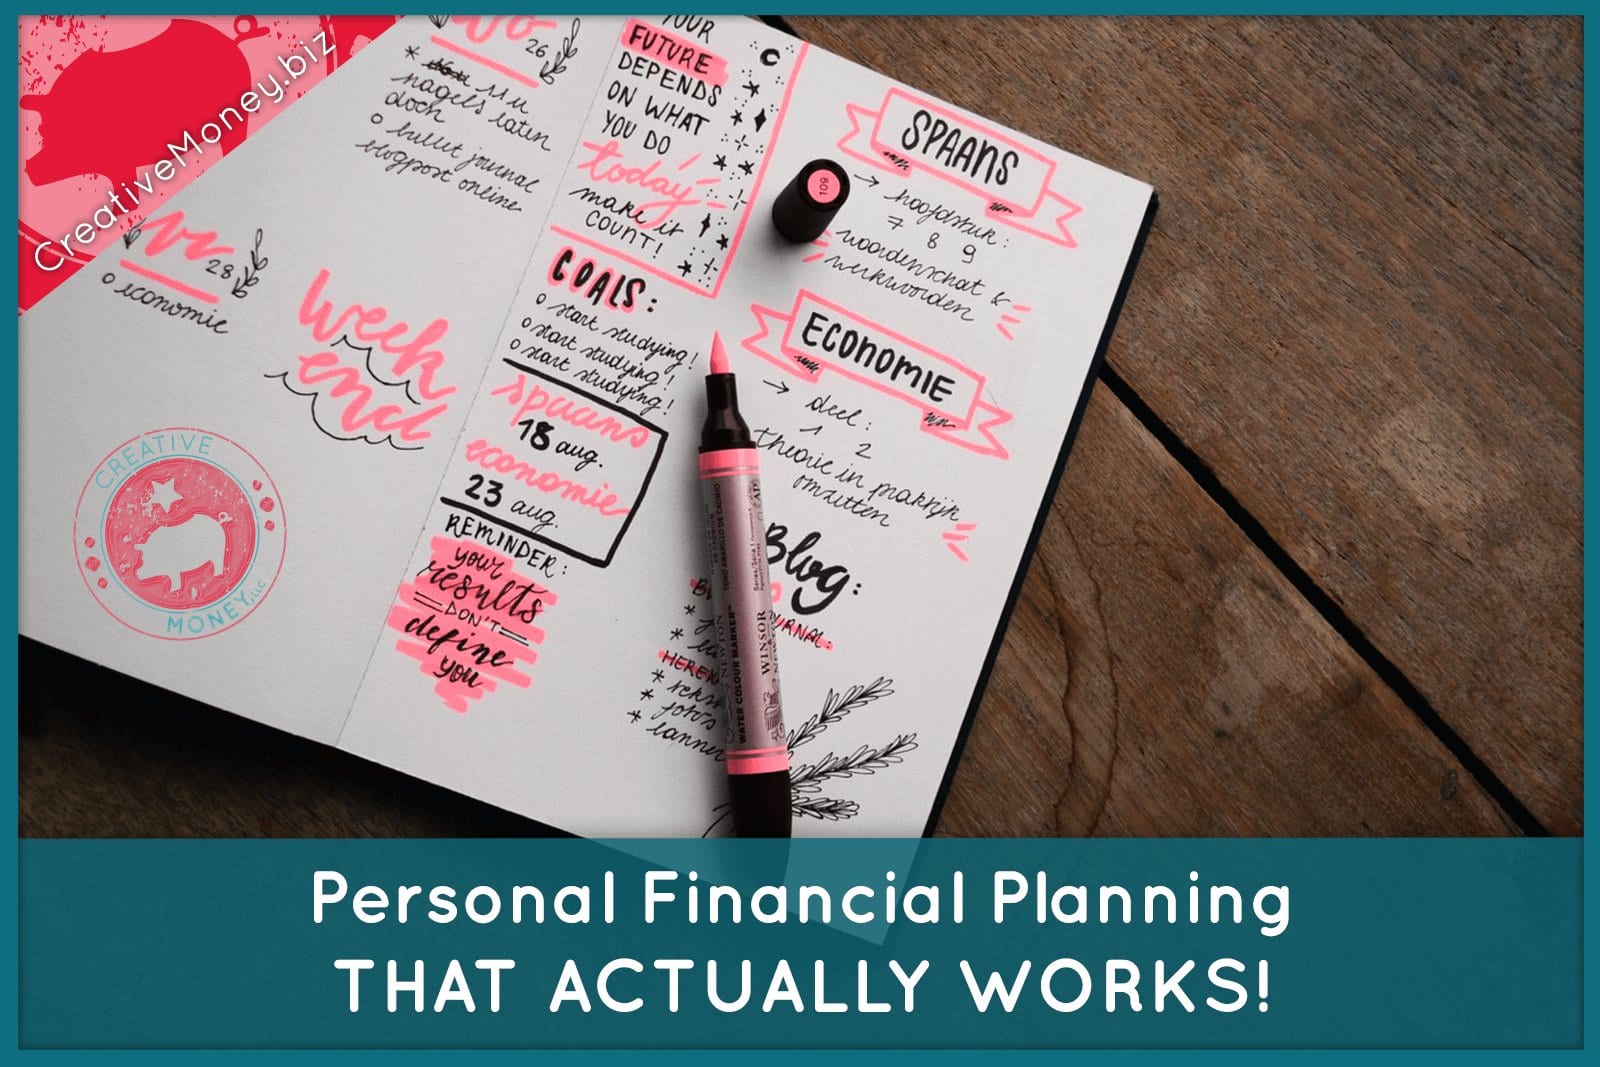 Personal Financial Planning that Actually Works!